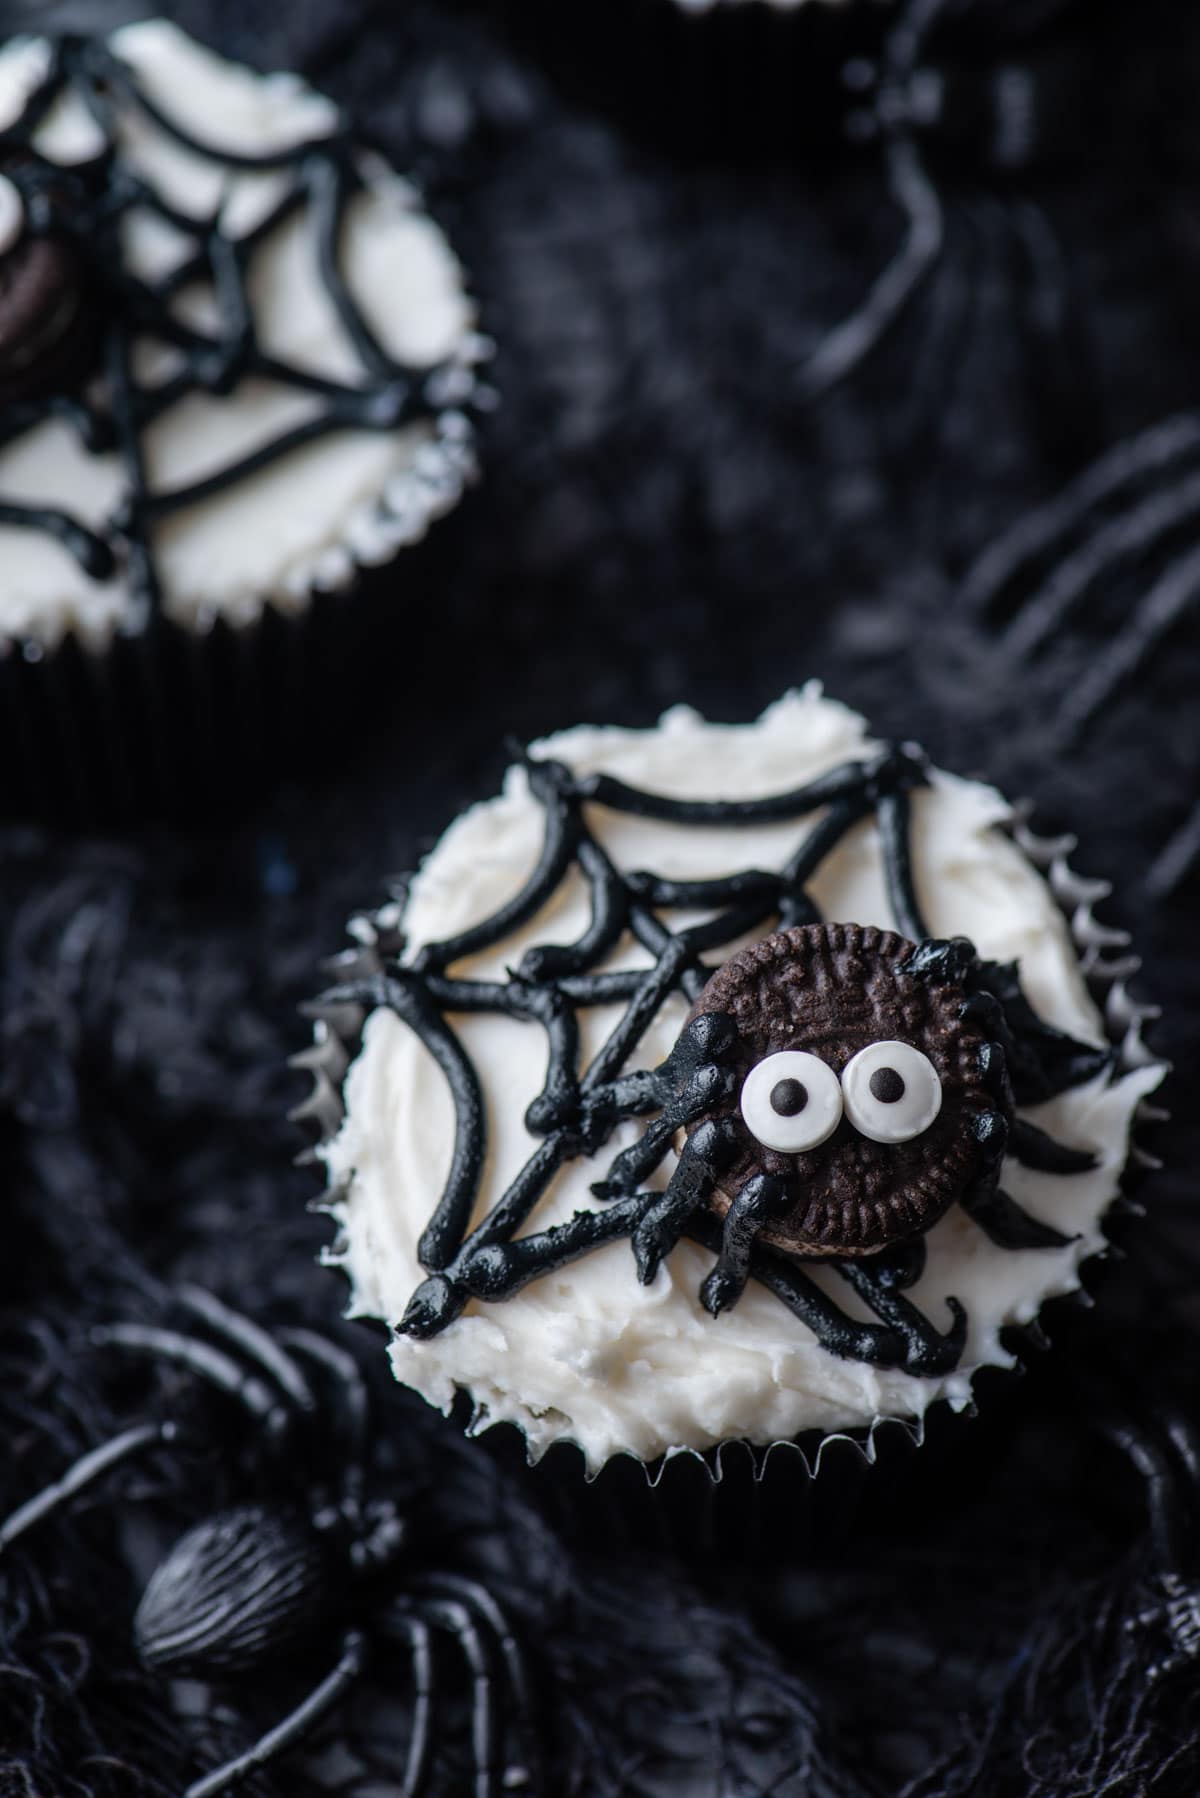 a spider web cupcake on top of black netting with black plastic spiders around it and another cupcake in the background